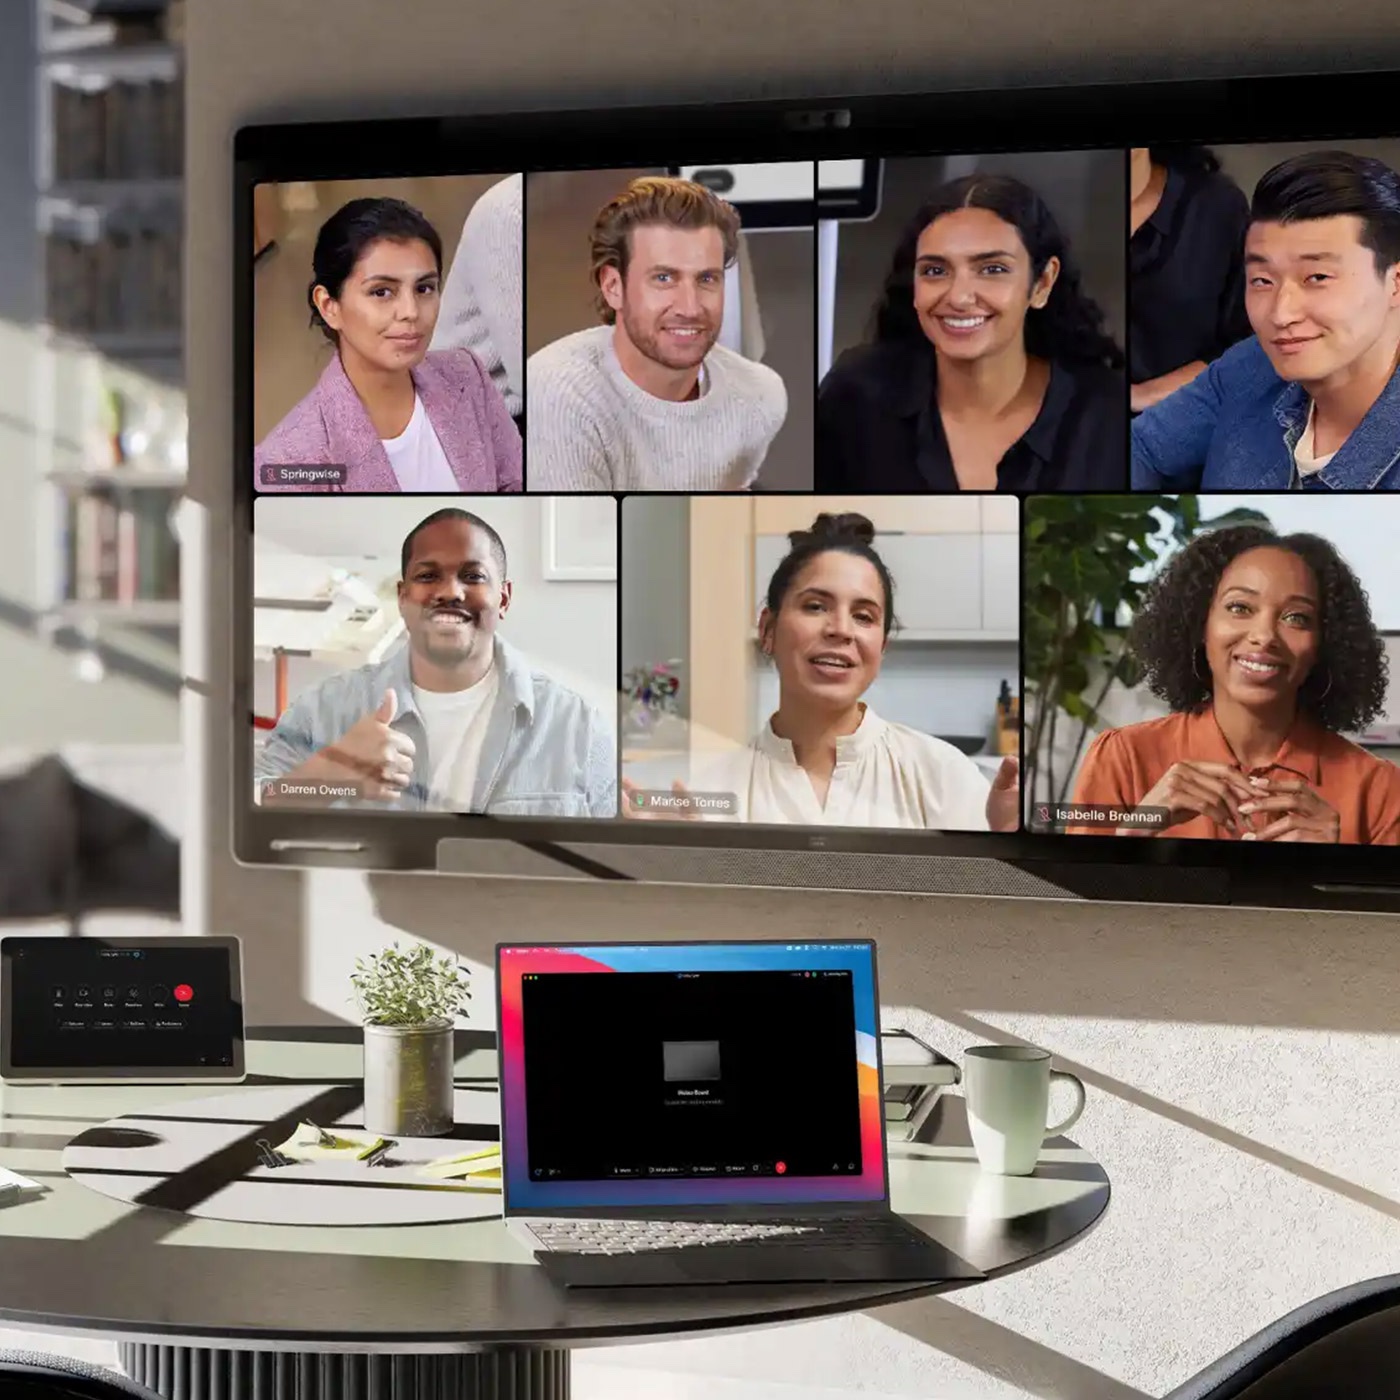 Video conference launches in open meeting space using Cisco Devices and intelligent camera frames view.